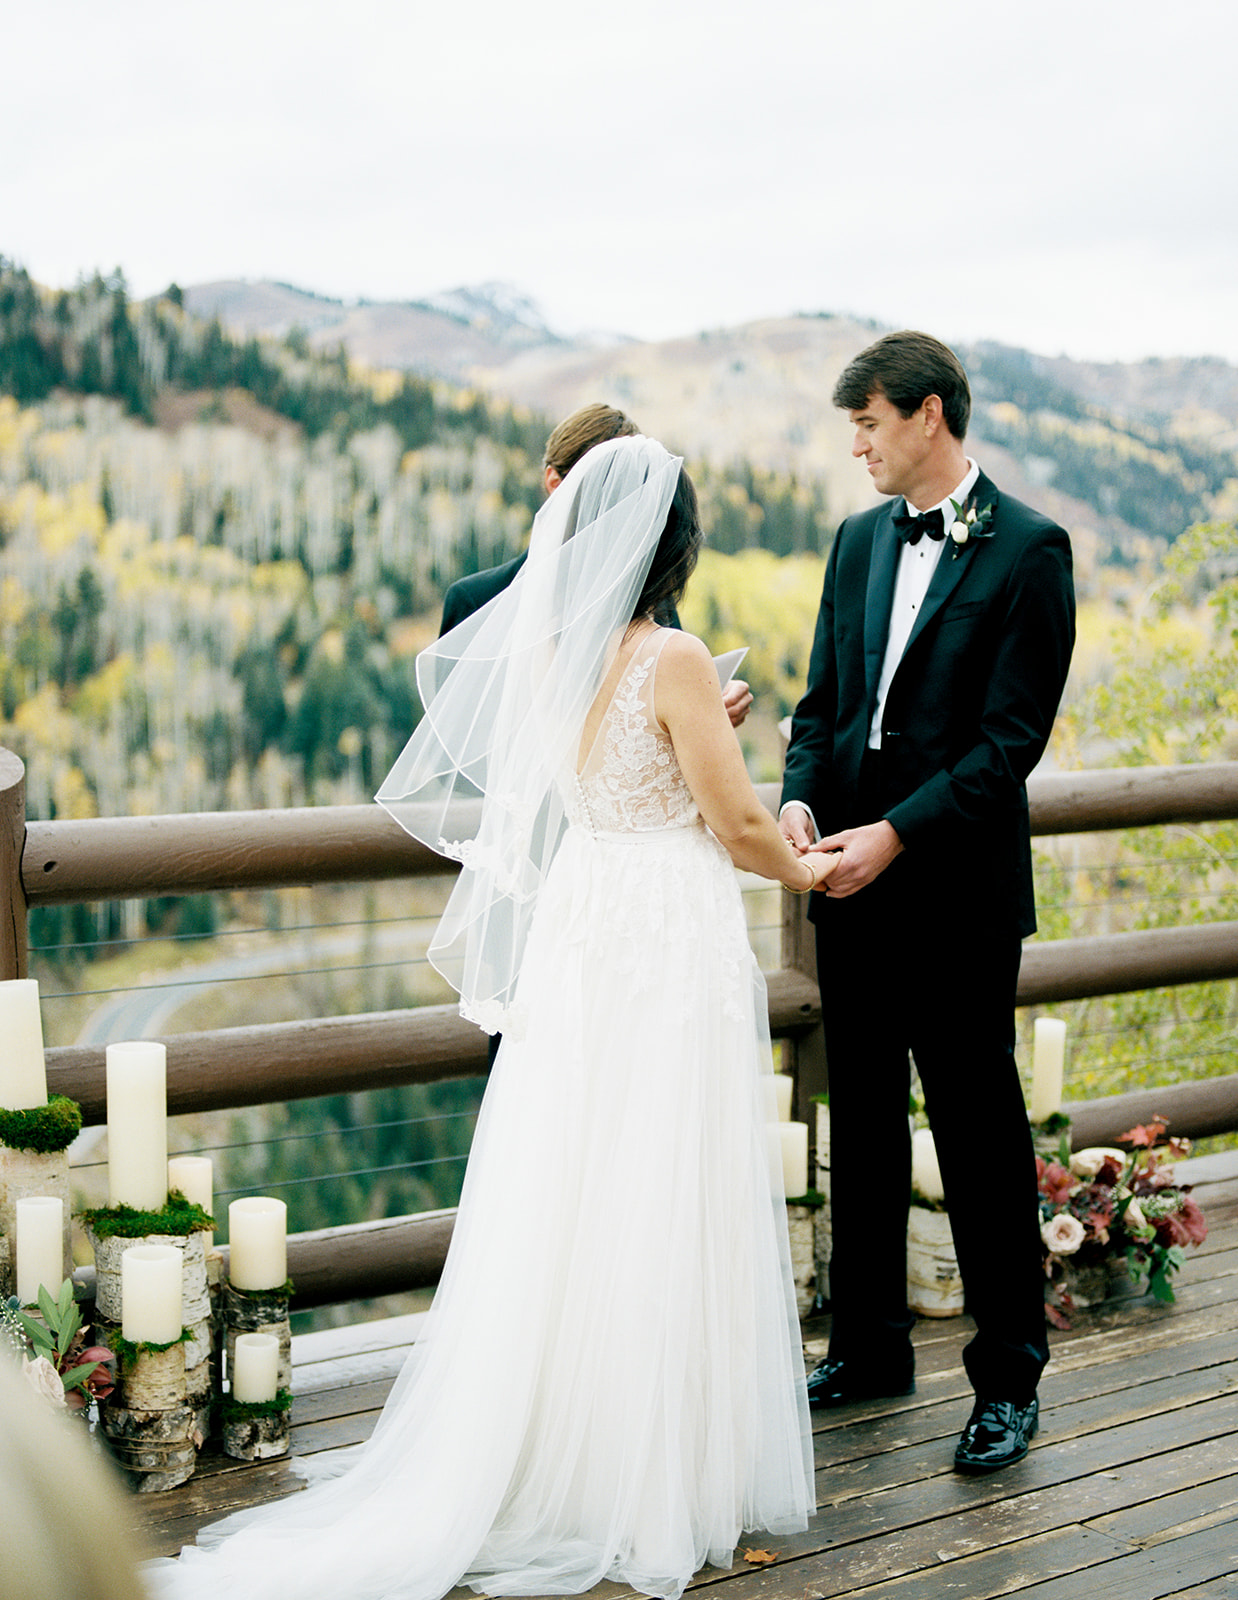 A fall wedding in Park City Utah. The bride is caucasian with black hair wearing a white short veil and white lace gown. The groom is male, caucasian and wearing a black tux with a black bow tie and white under button up shirt. He has dark brown/black hair and is holding the bride's hand during the ceremony.